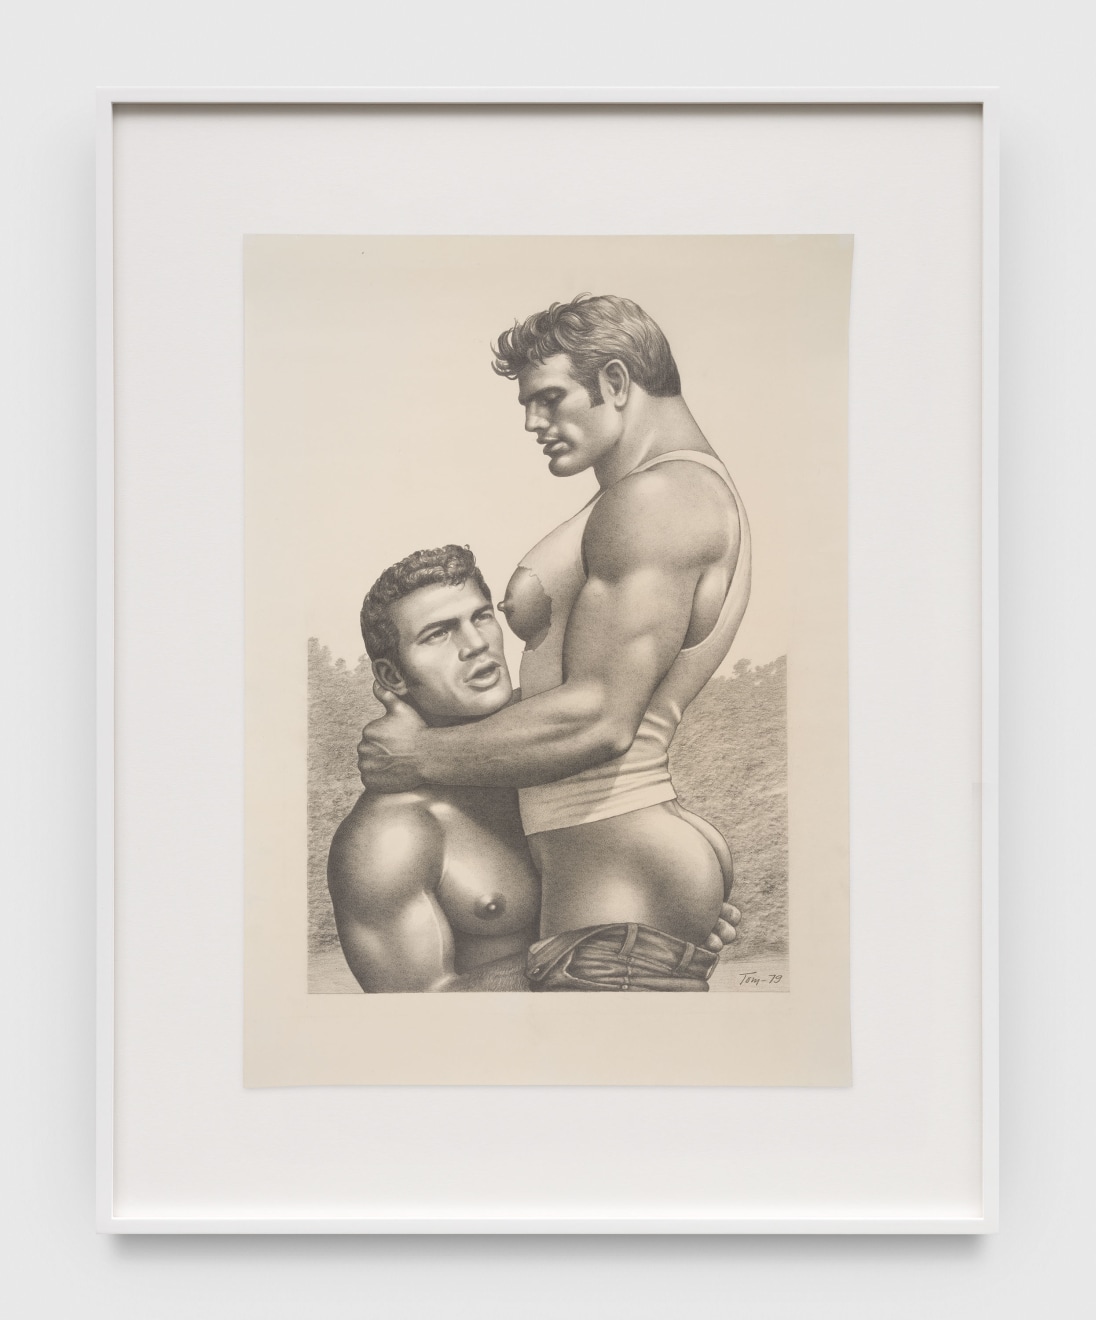 Tom of Finland, Untitled, 1979